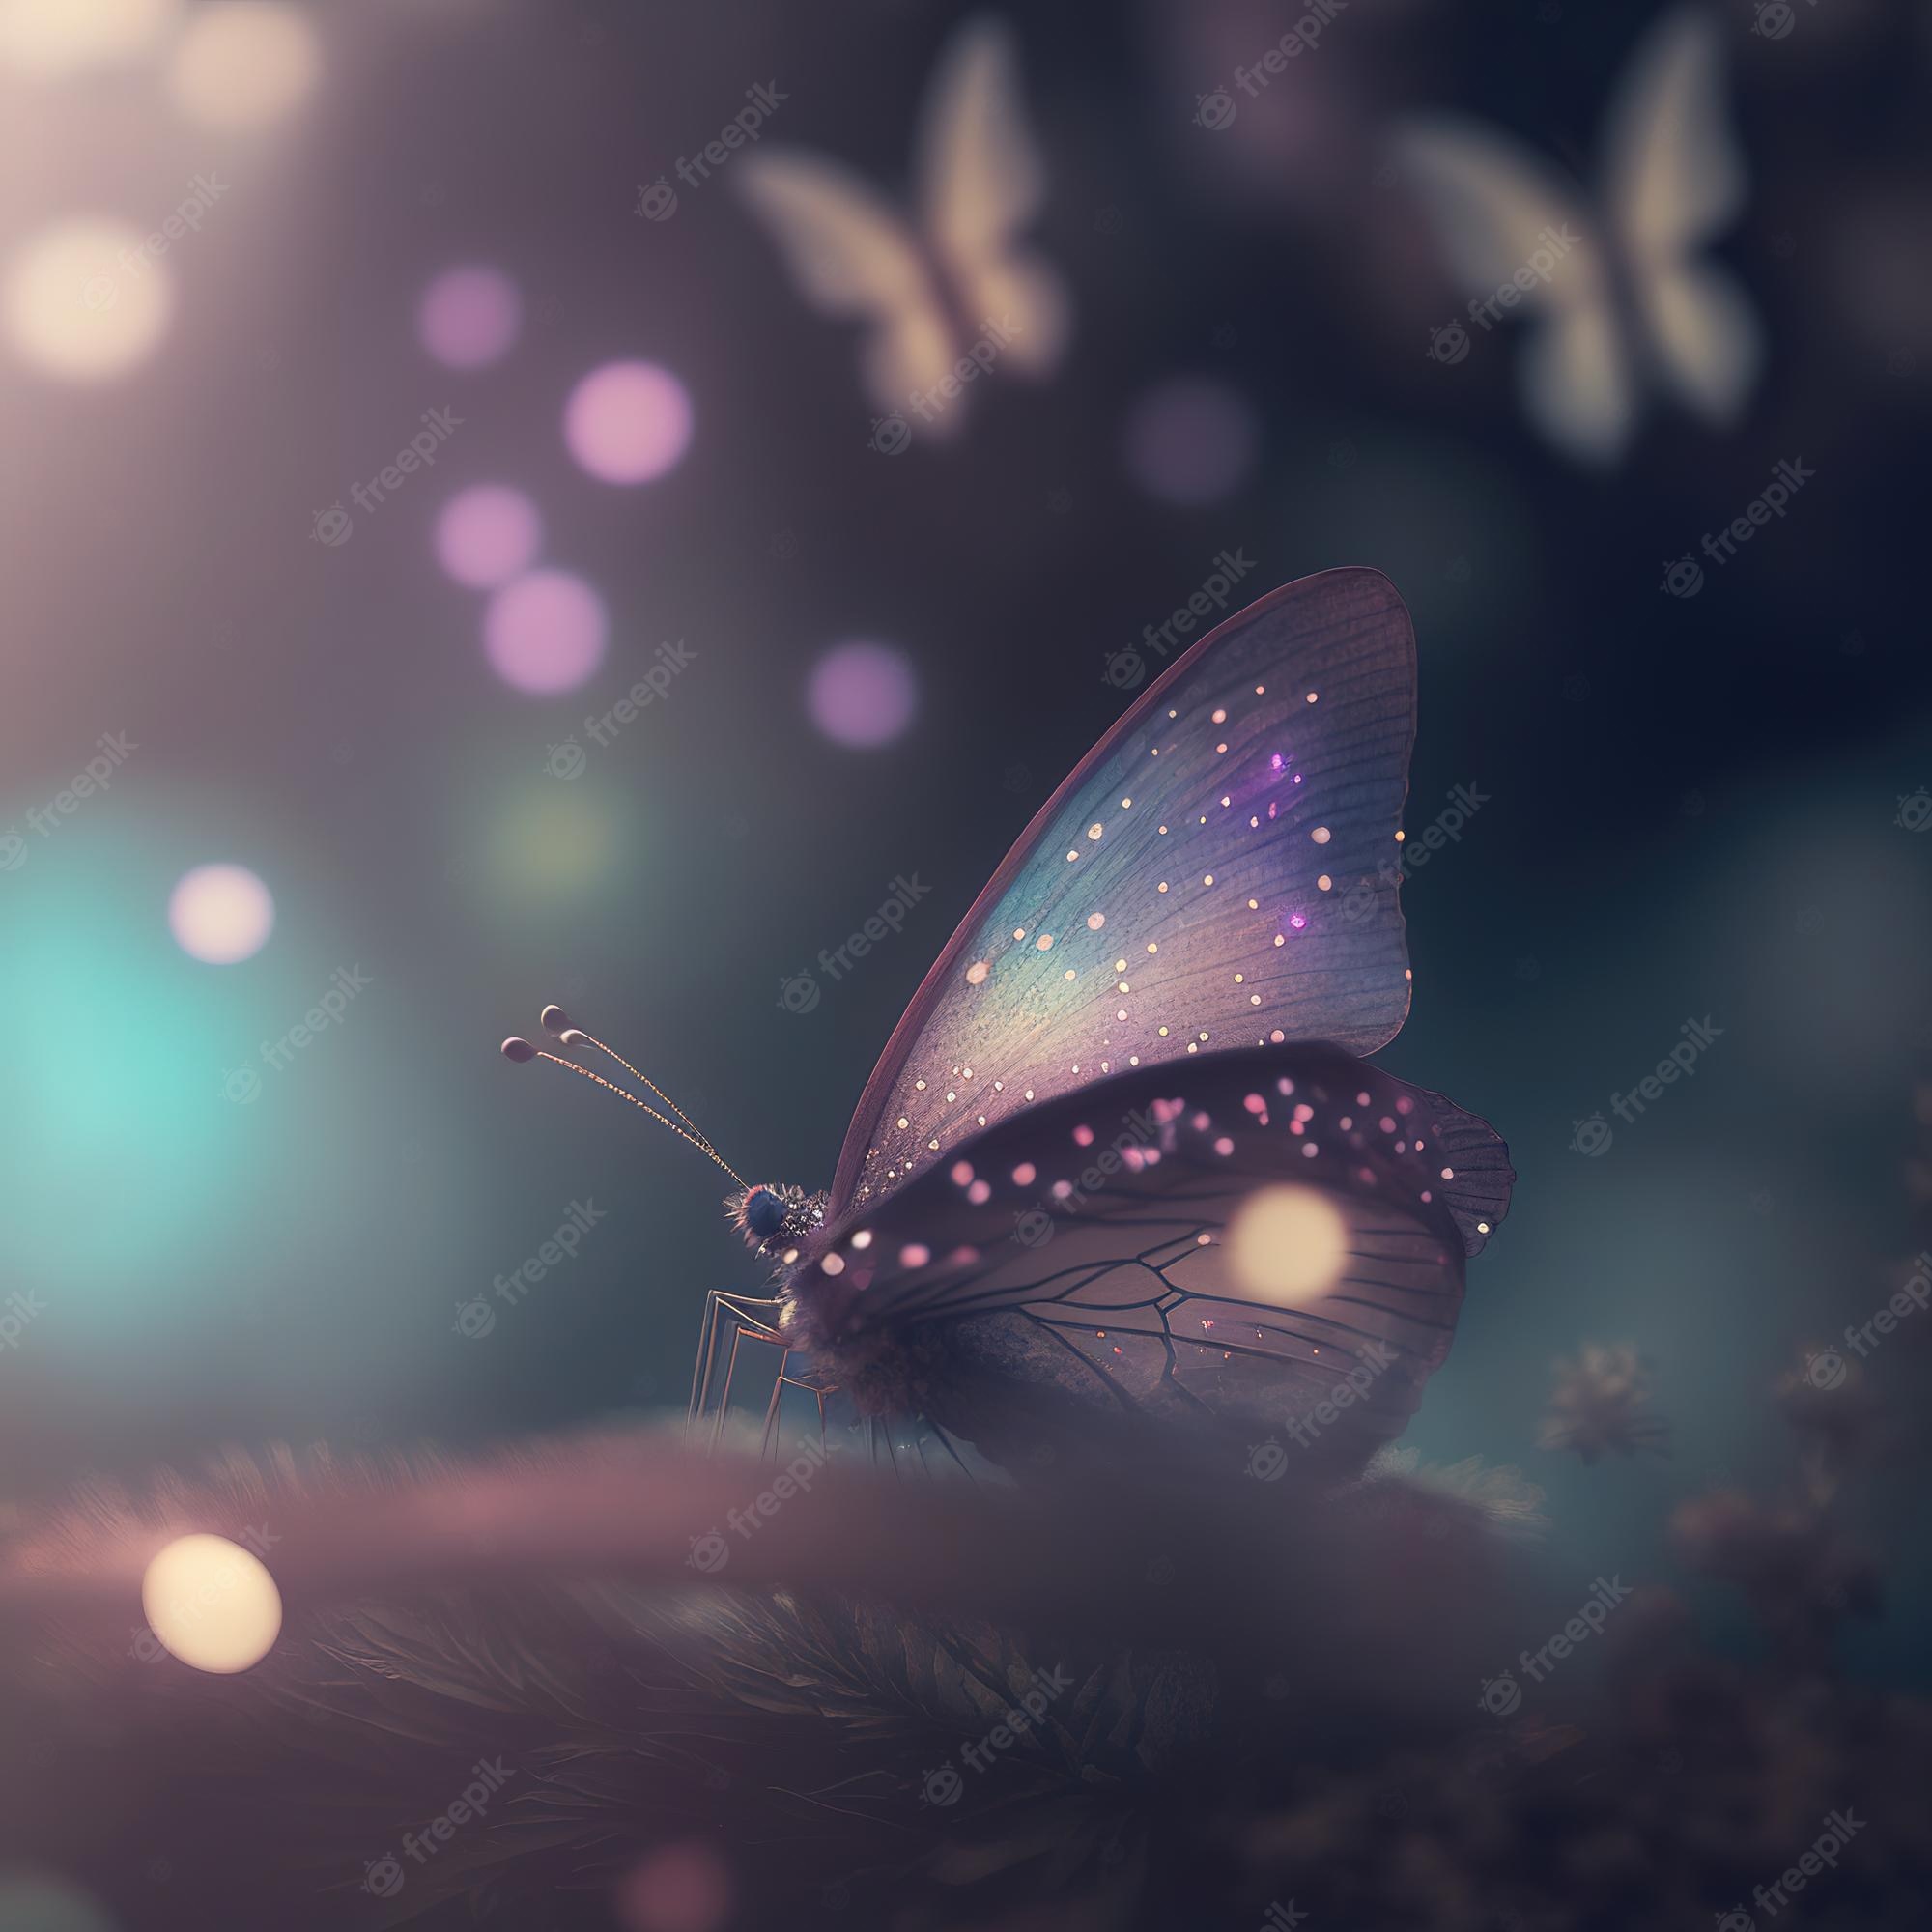 Butterfly wallpaper images